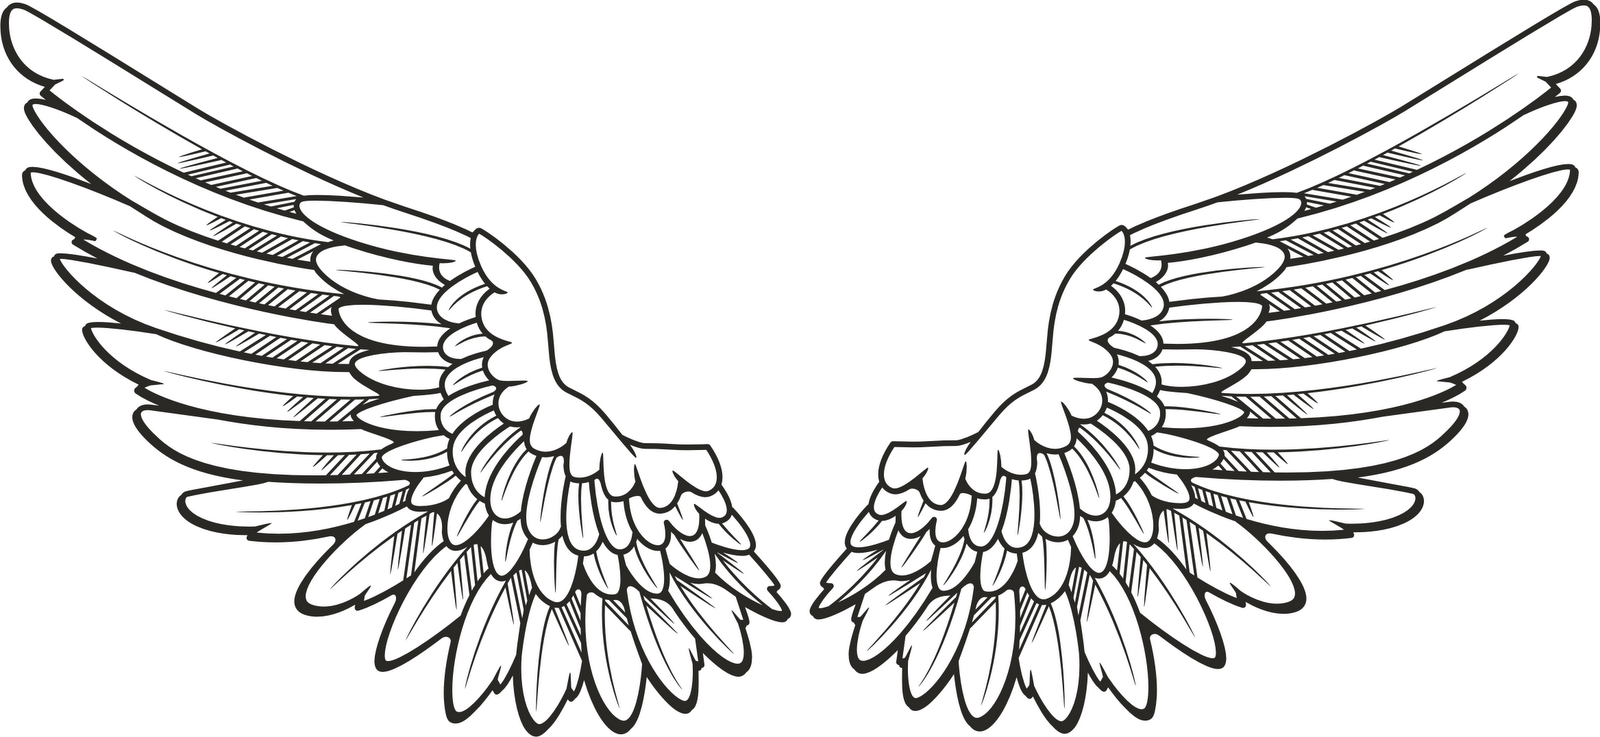 R minecraft feathers pinterest. Wings clipart